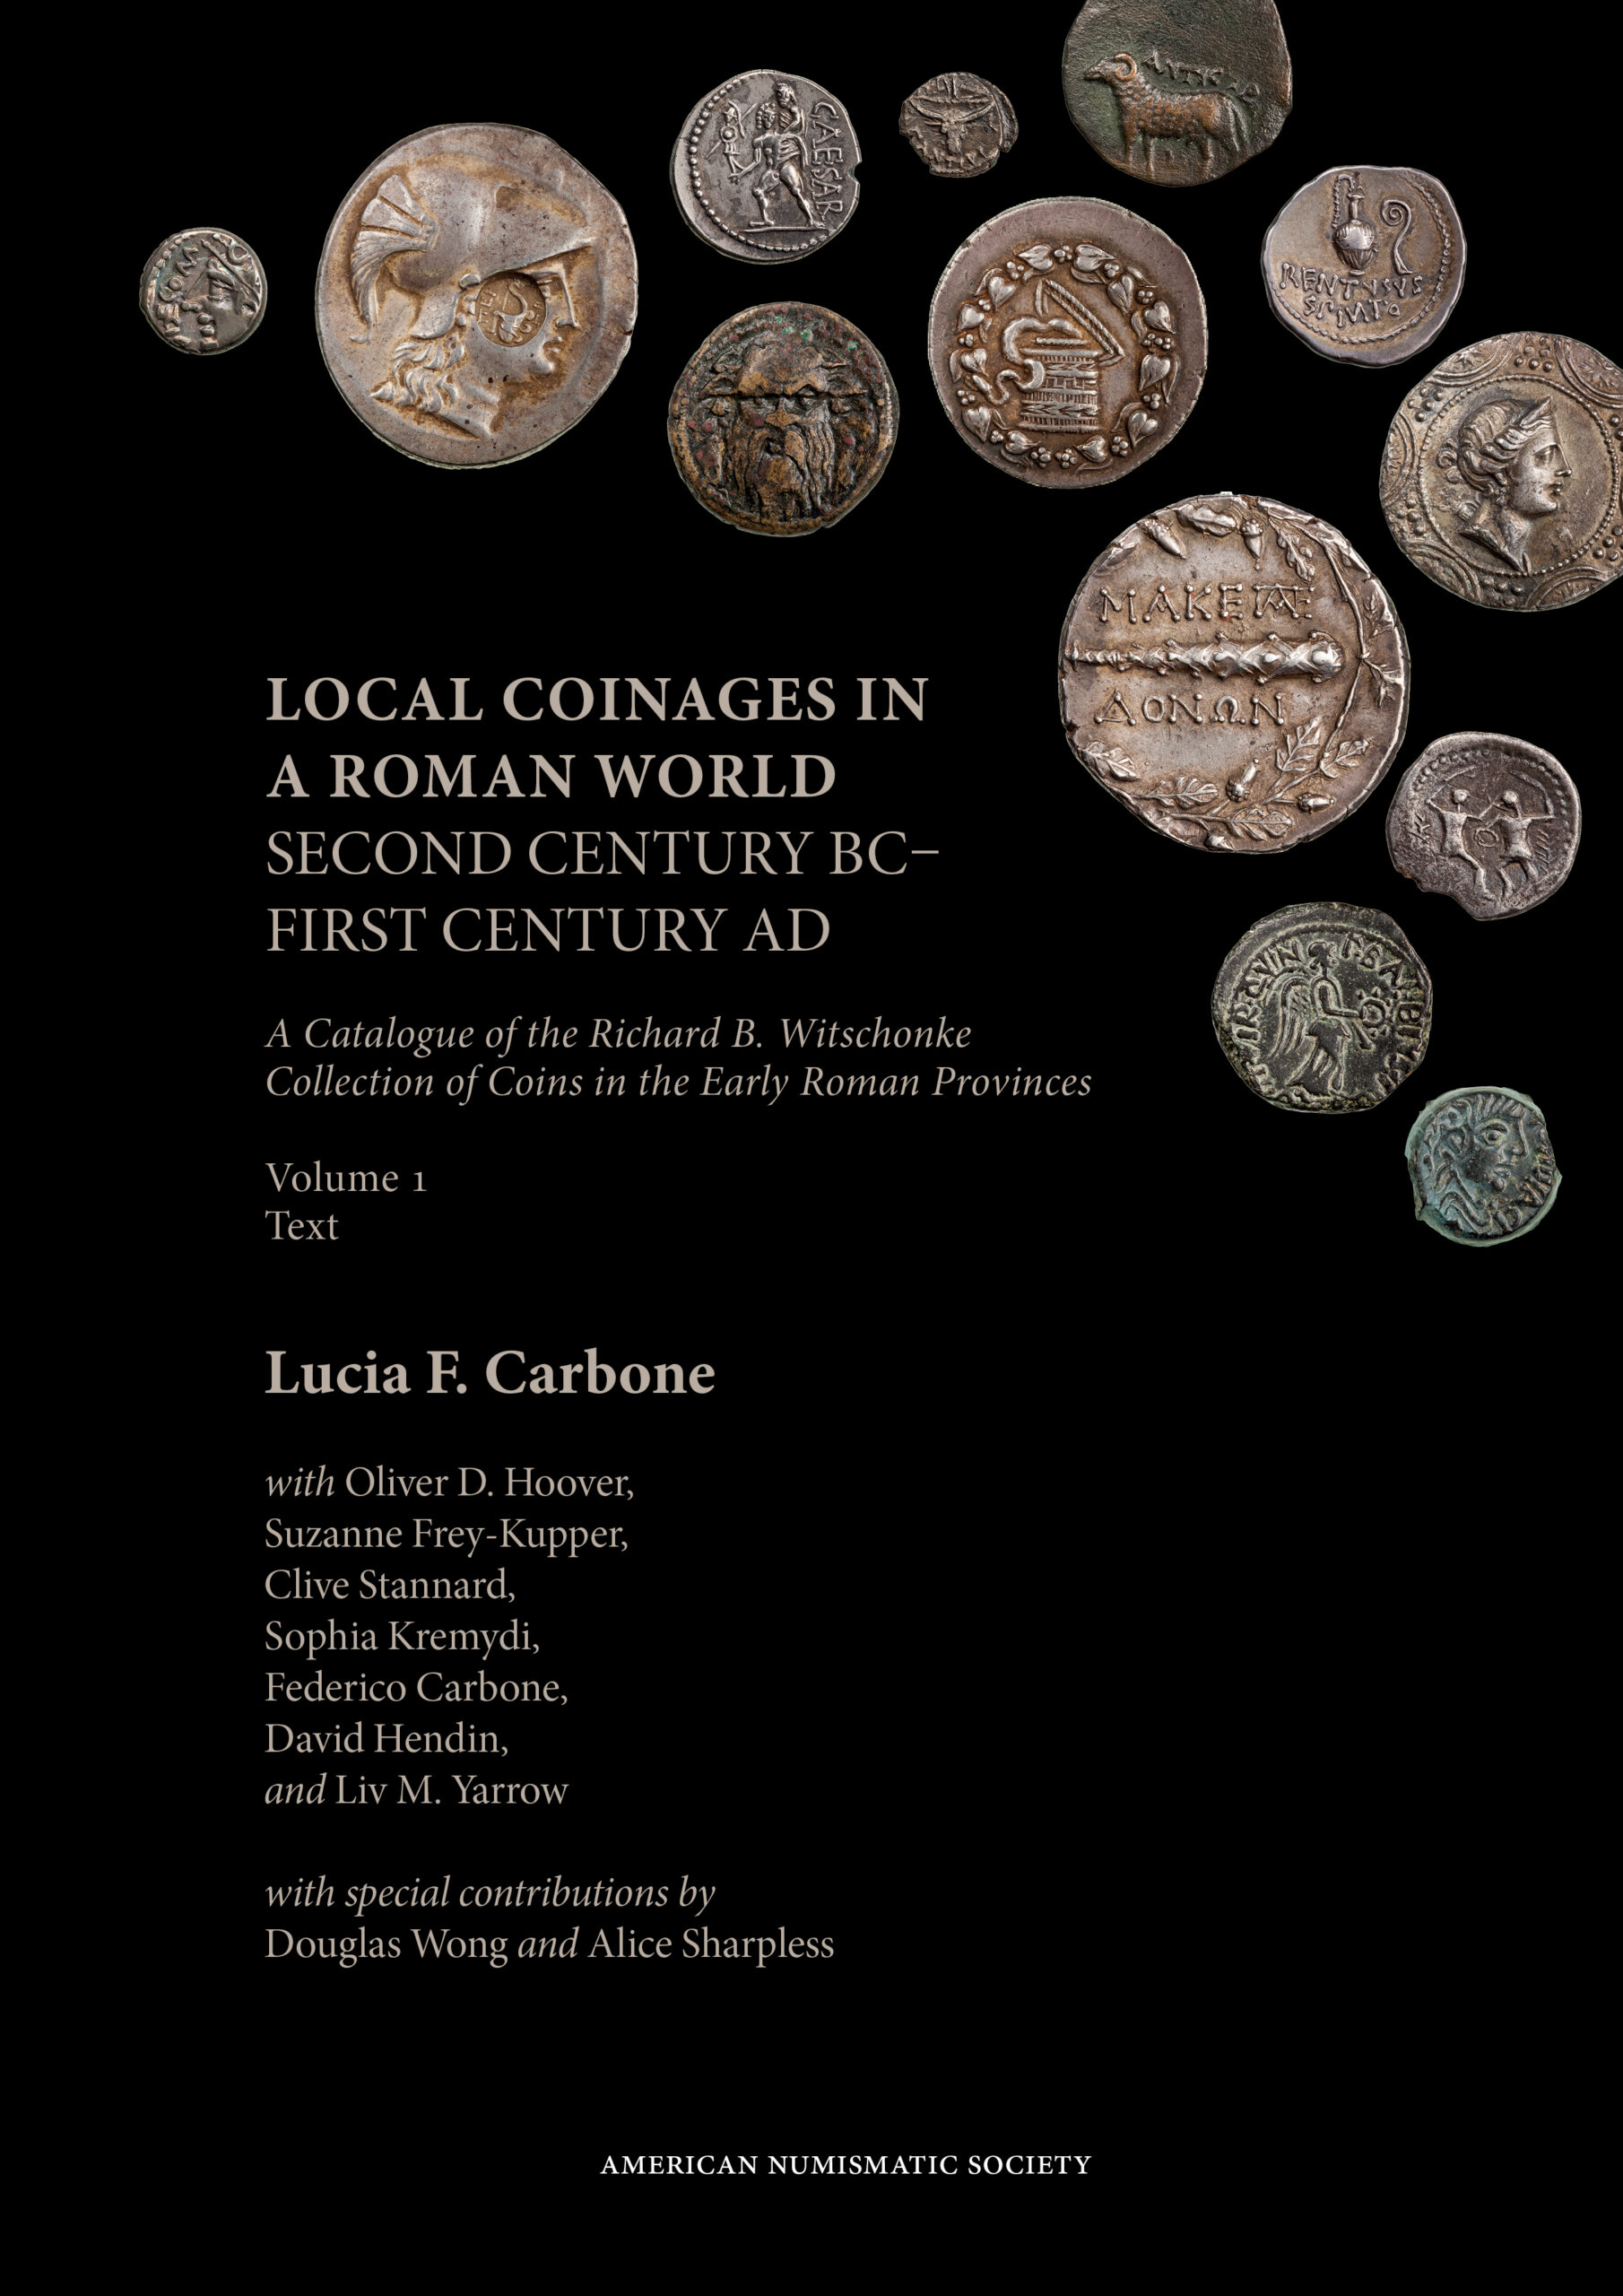 Local Coinages in a Roman World is at the printer!